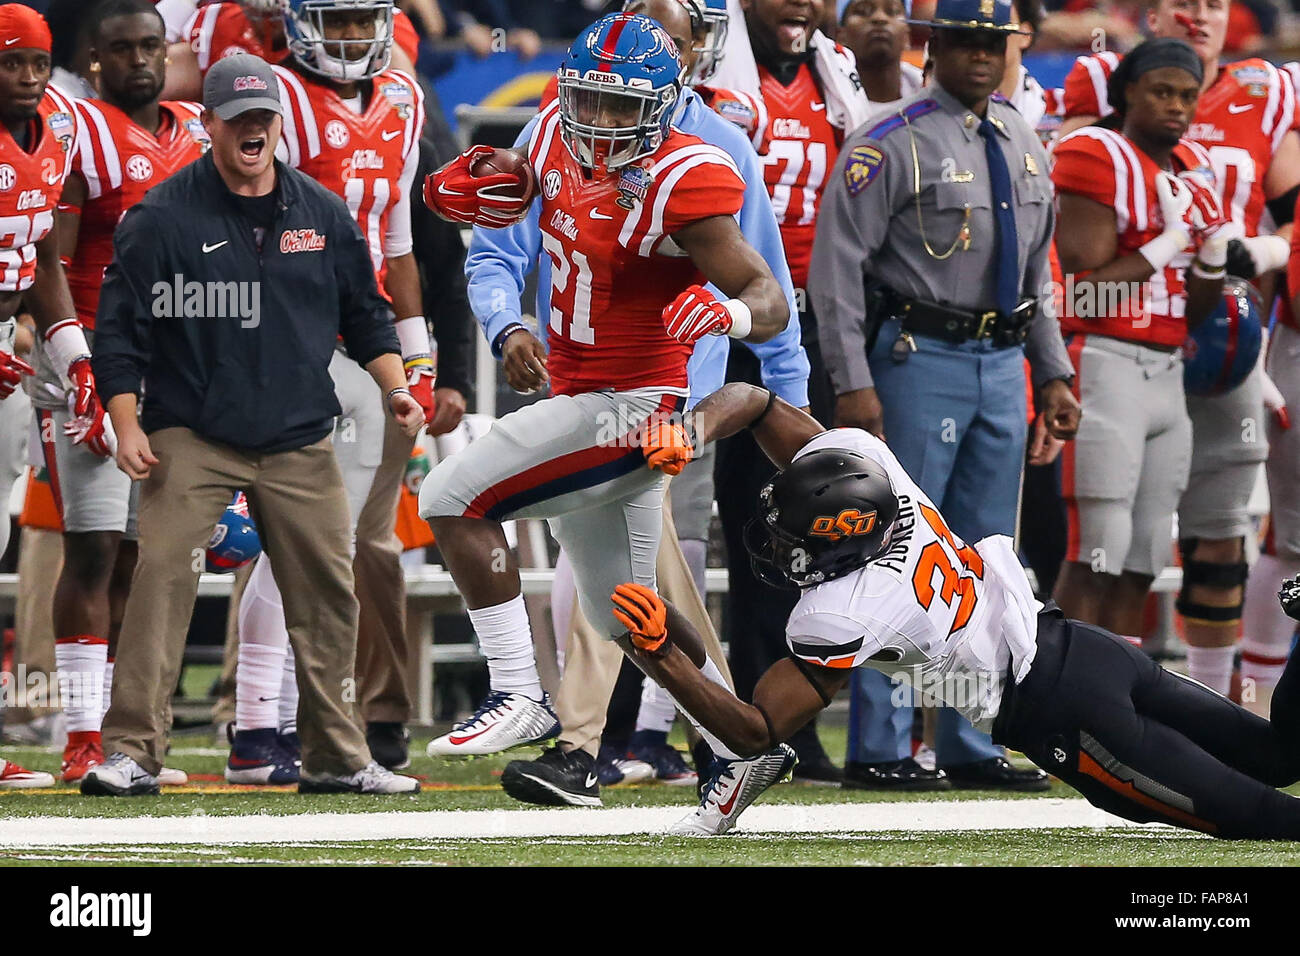 January 01, 2016 - Ole Miss Rebels linebacker Terry Caldwell (21) shrugs off the tackle of Oklahoma State Cowboys safety Tre Flowers (31) during the game between the Ole Miss Rebels and the Oklahoma State Cowboys at the Mercedes-Benz Superdome in New Orleans, LA. Stephen Lew/CSM Stock Photo